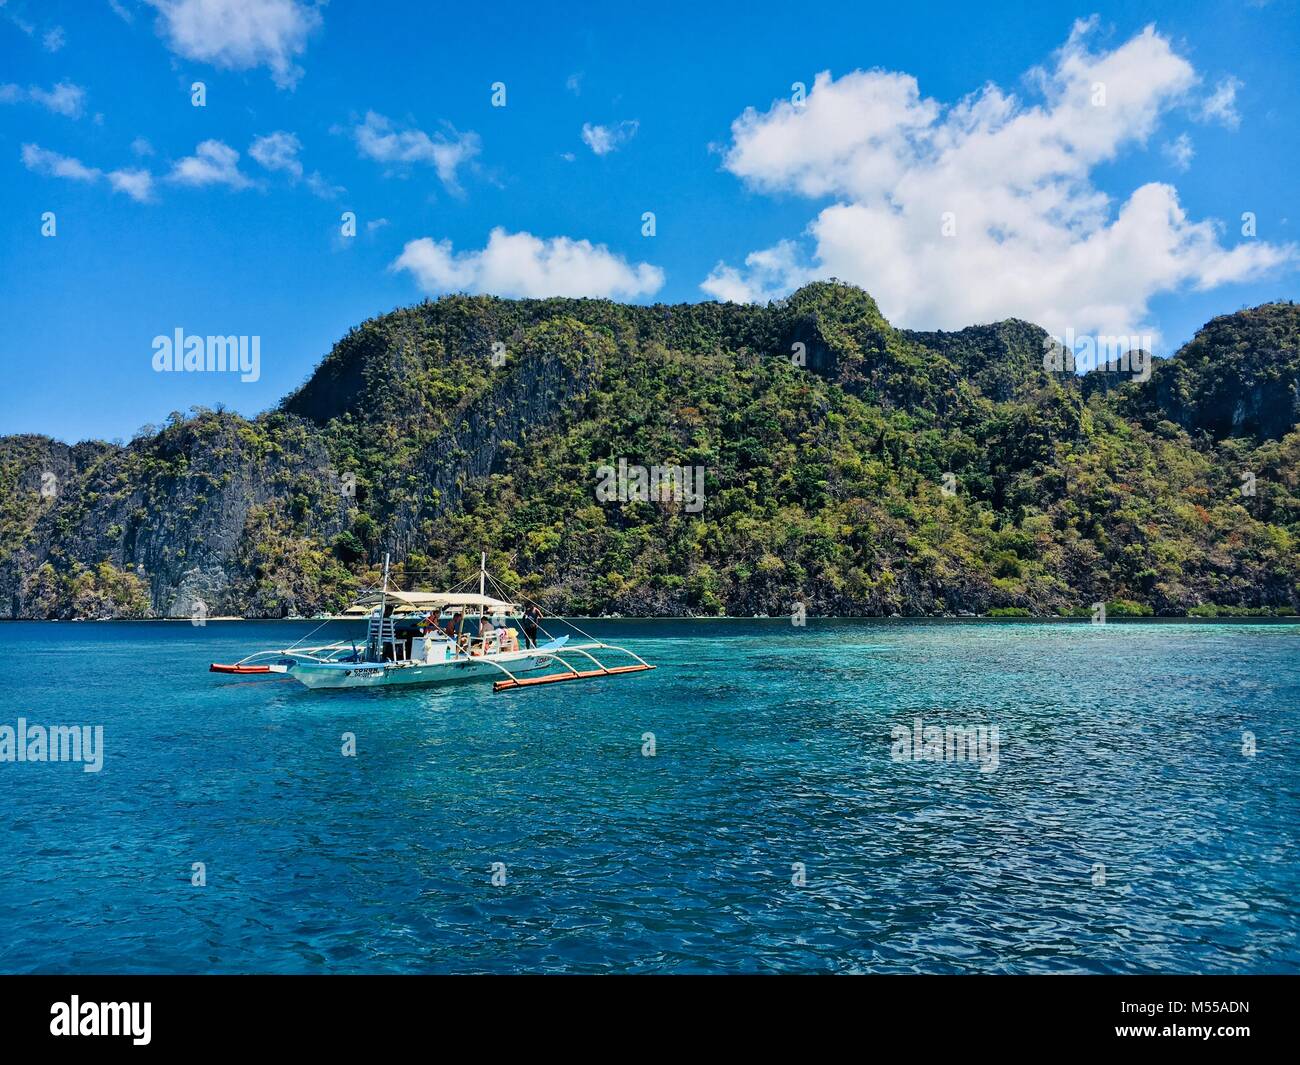 The beauty of the island of Coron, Philippines Stock Photo